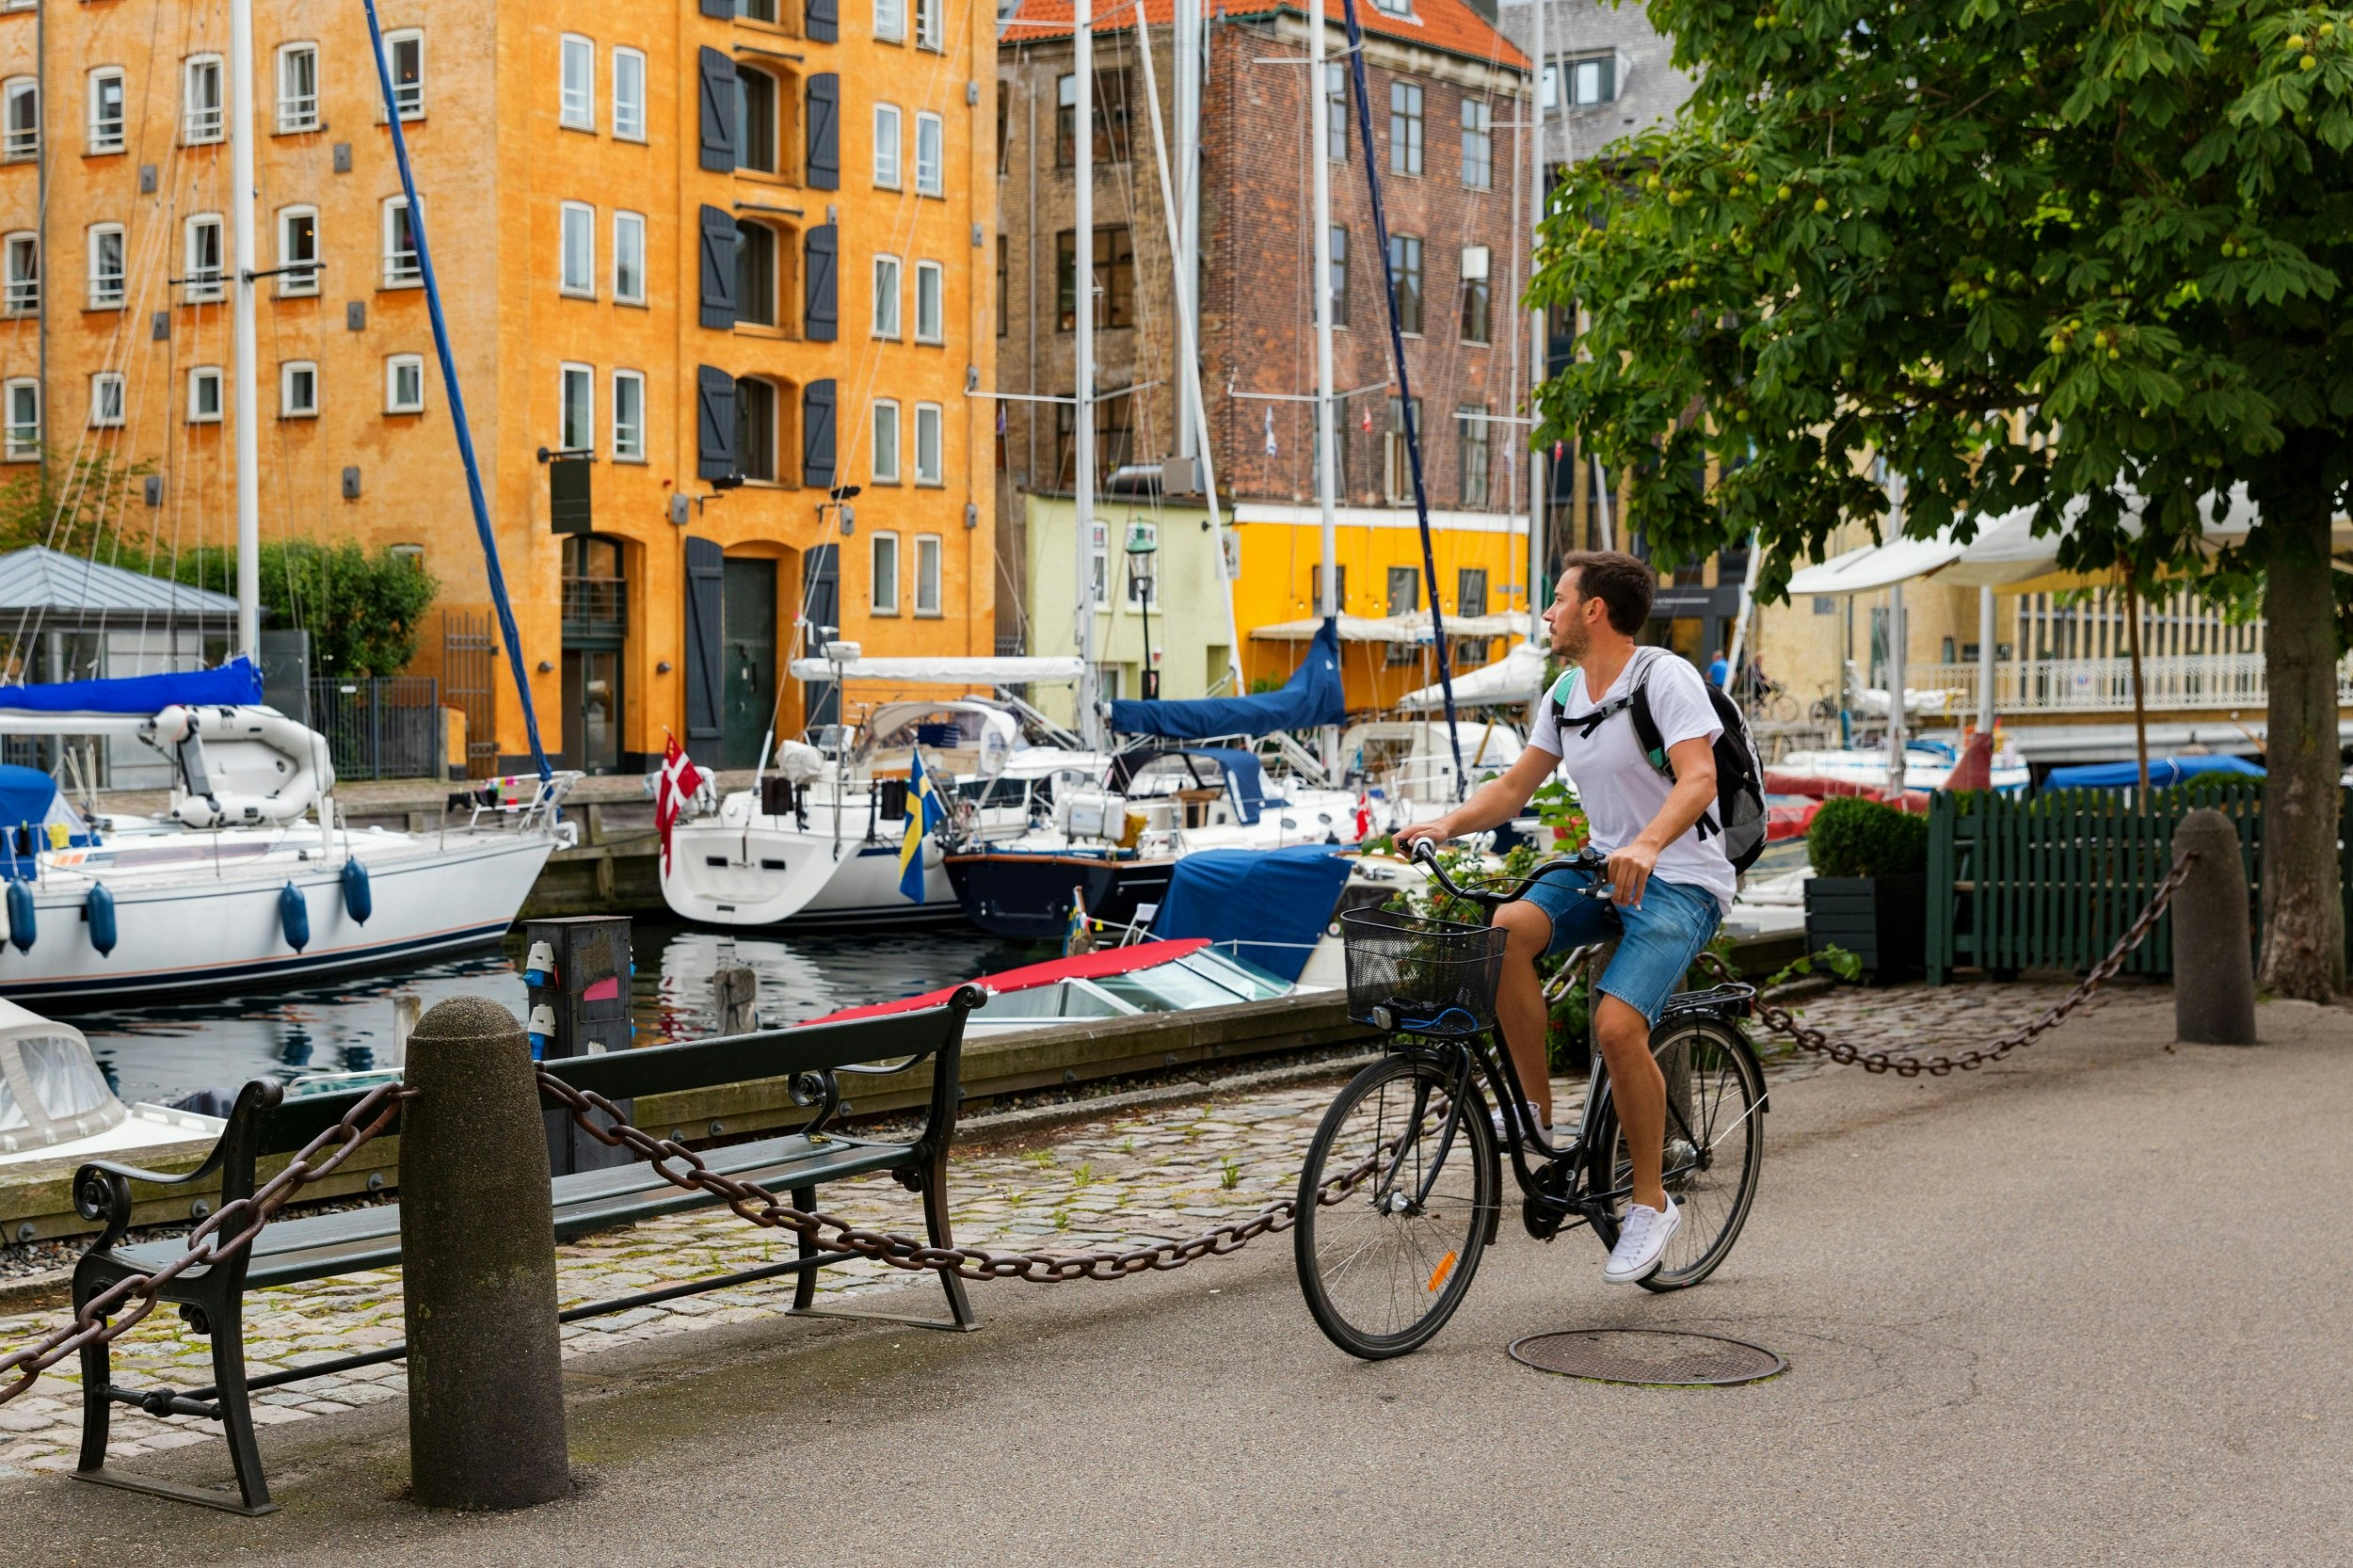 A male cyclist rides alongside a picturesque canal, with many small boats docked there.